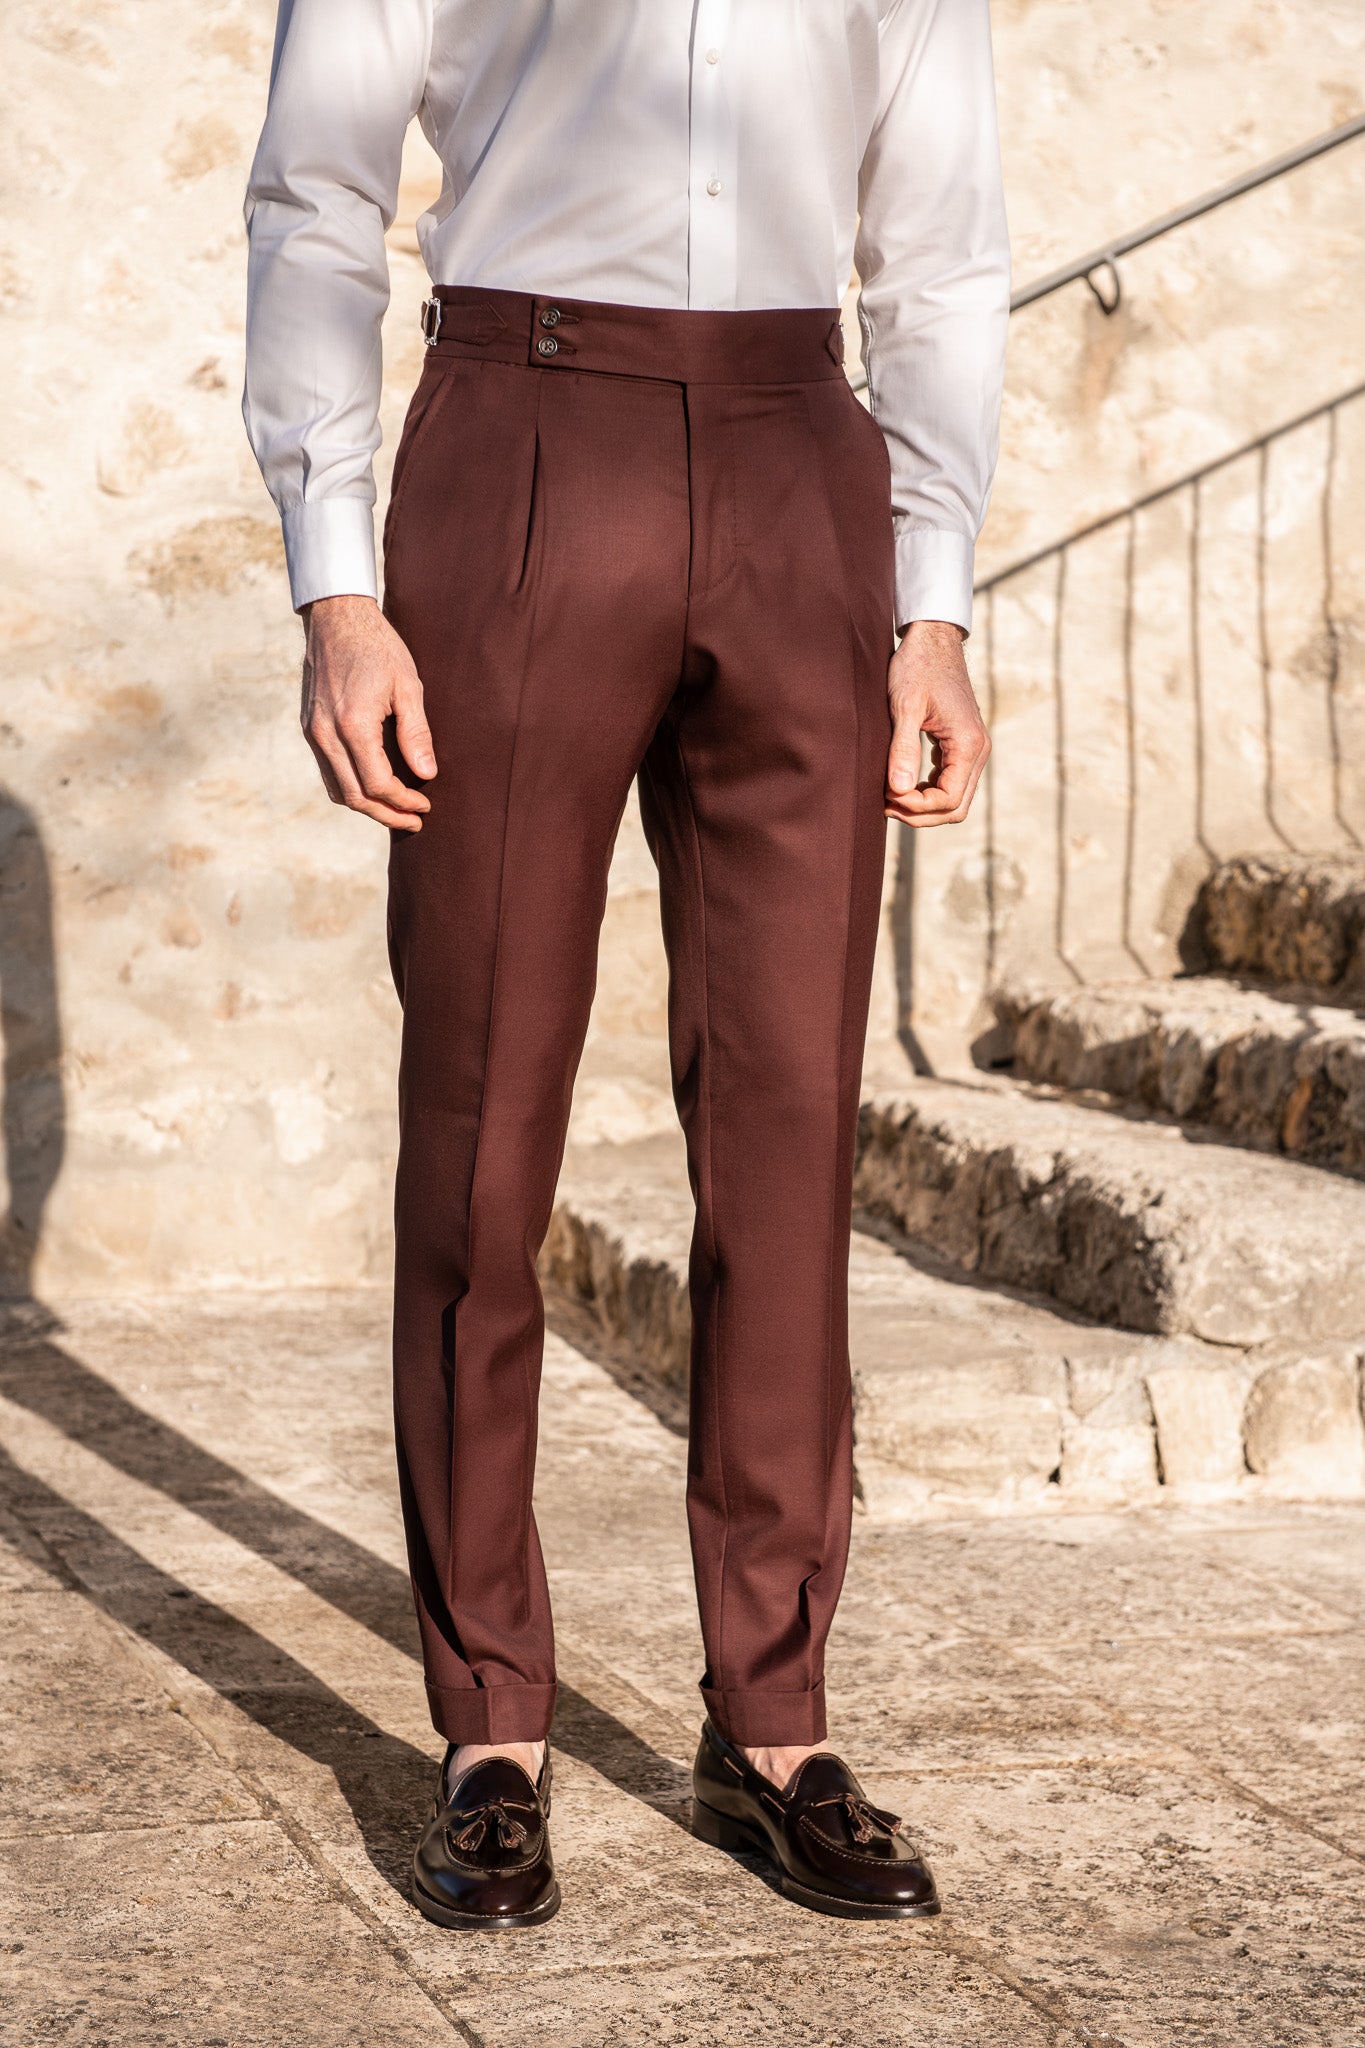 Burgundy trousers Soragna Capsule Collection - Made in Italy